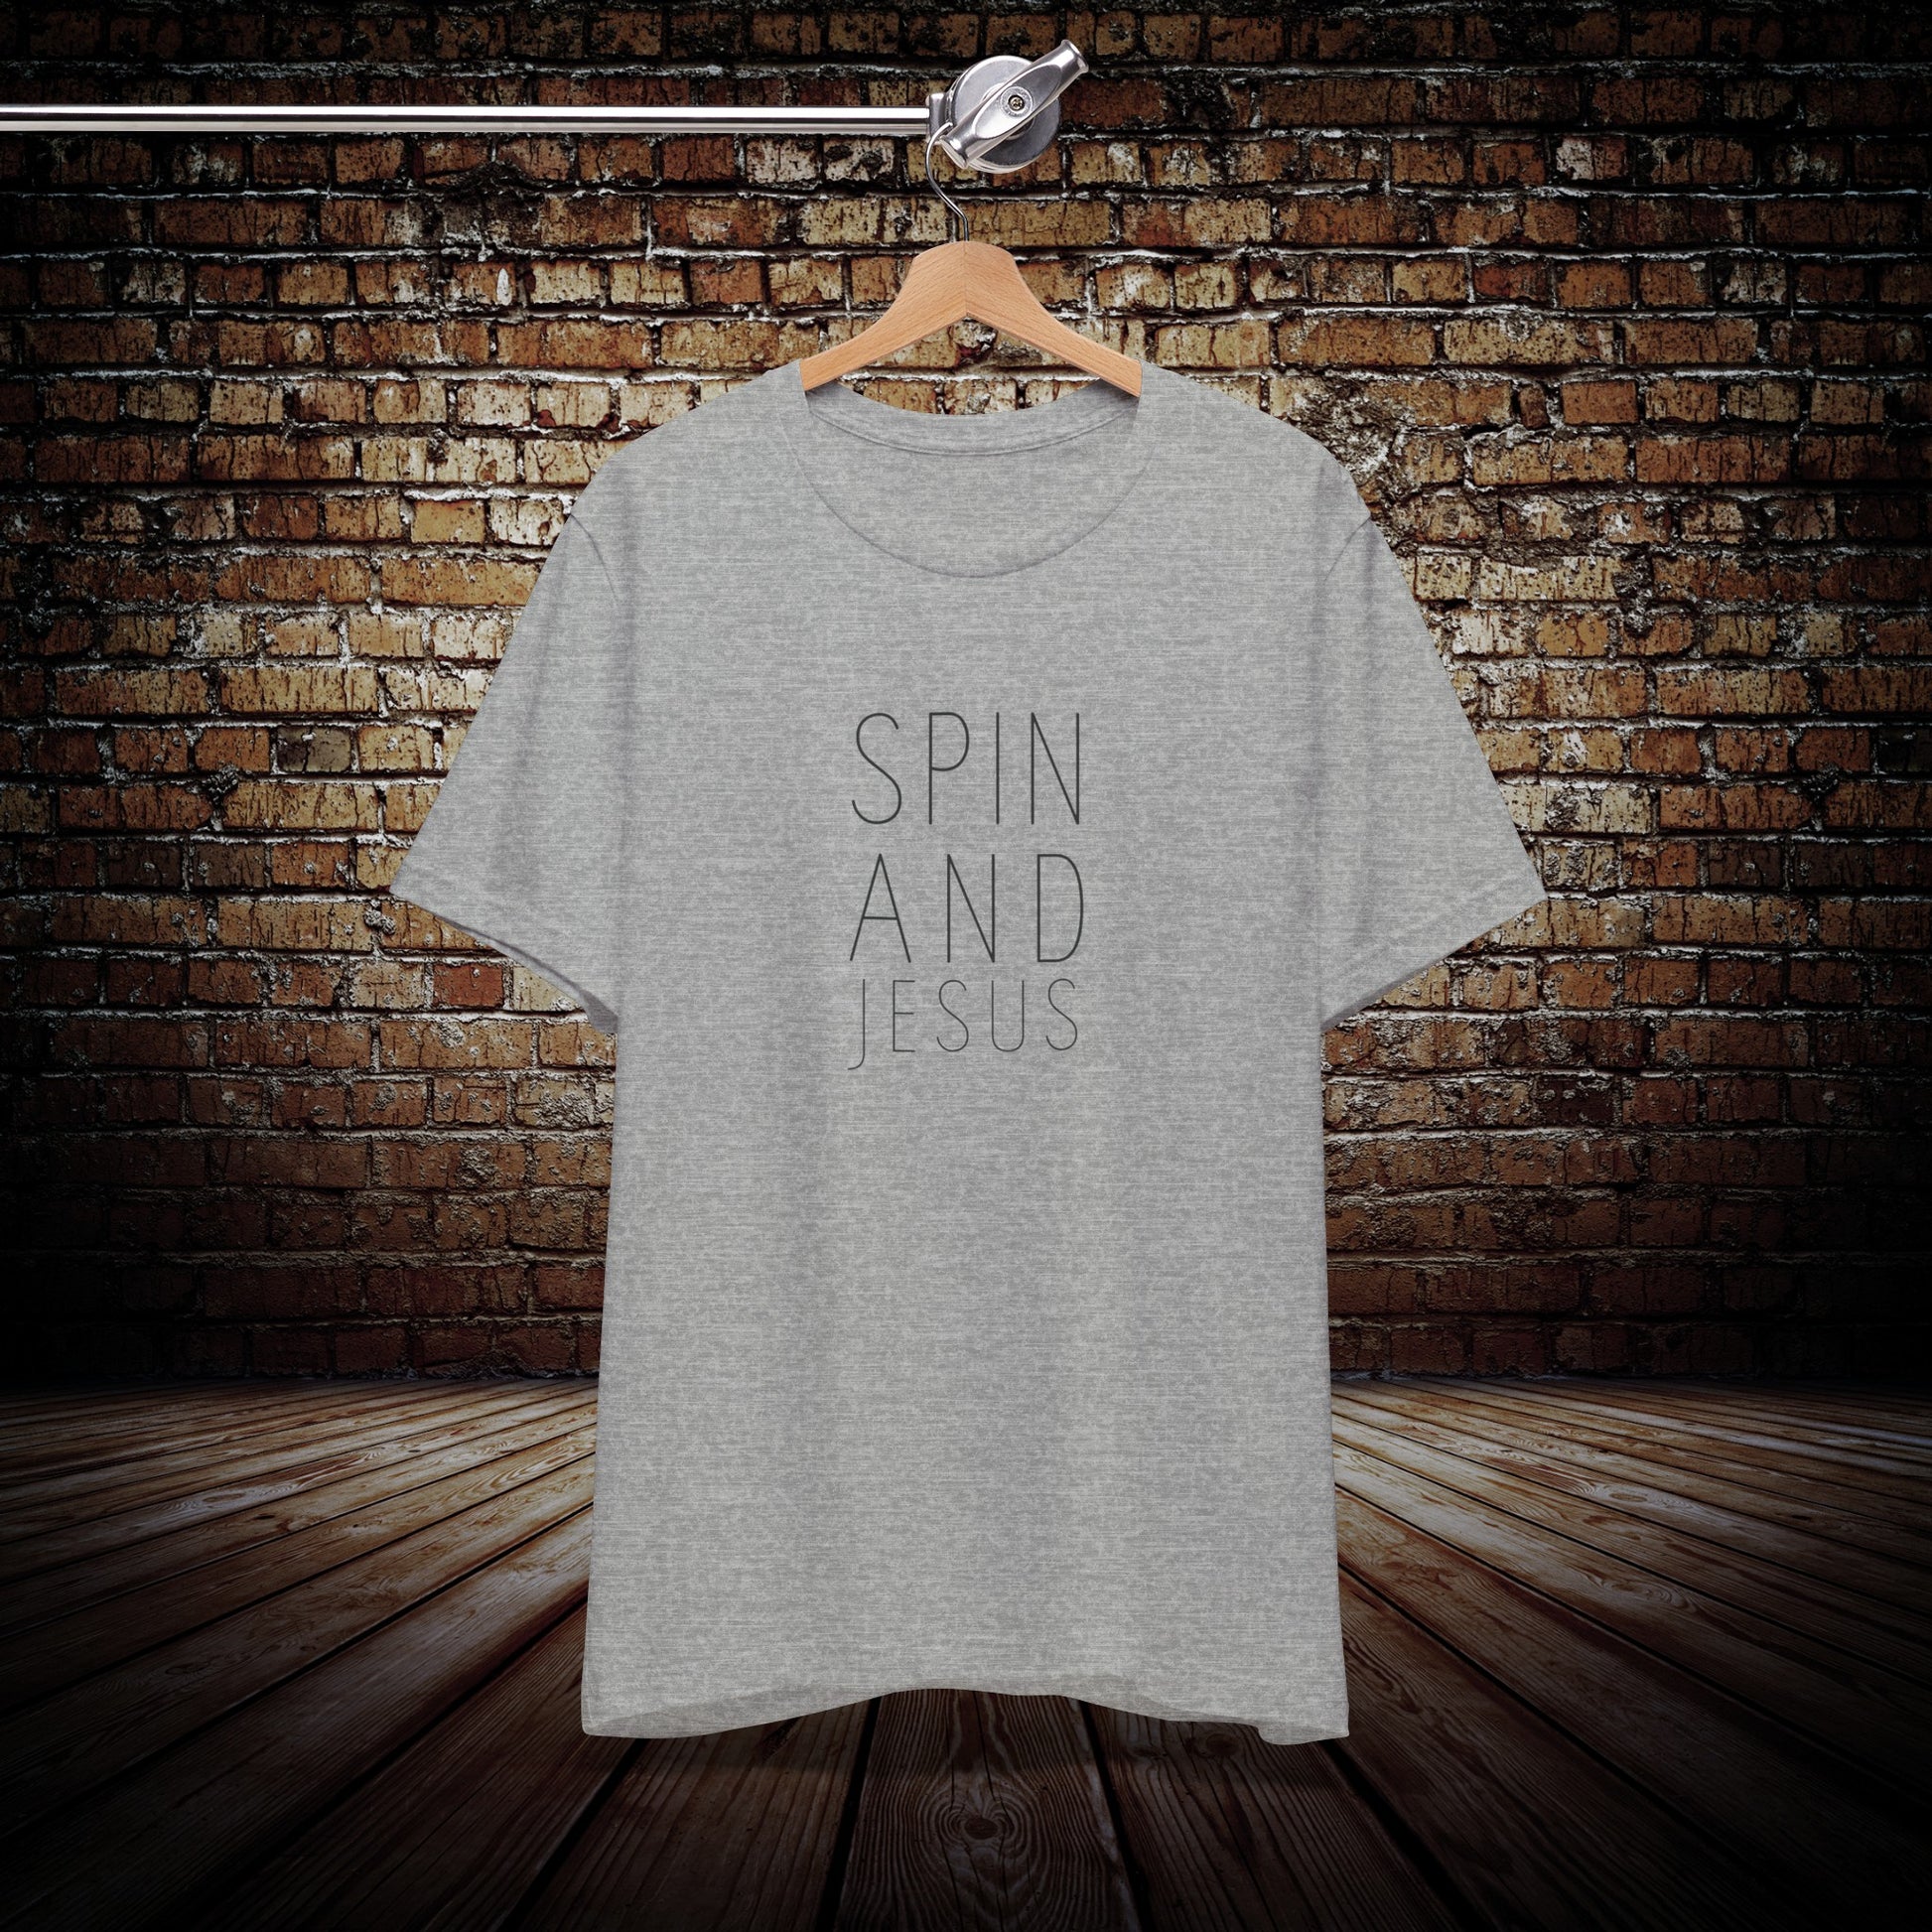 Spin and Jesus T-Shirt